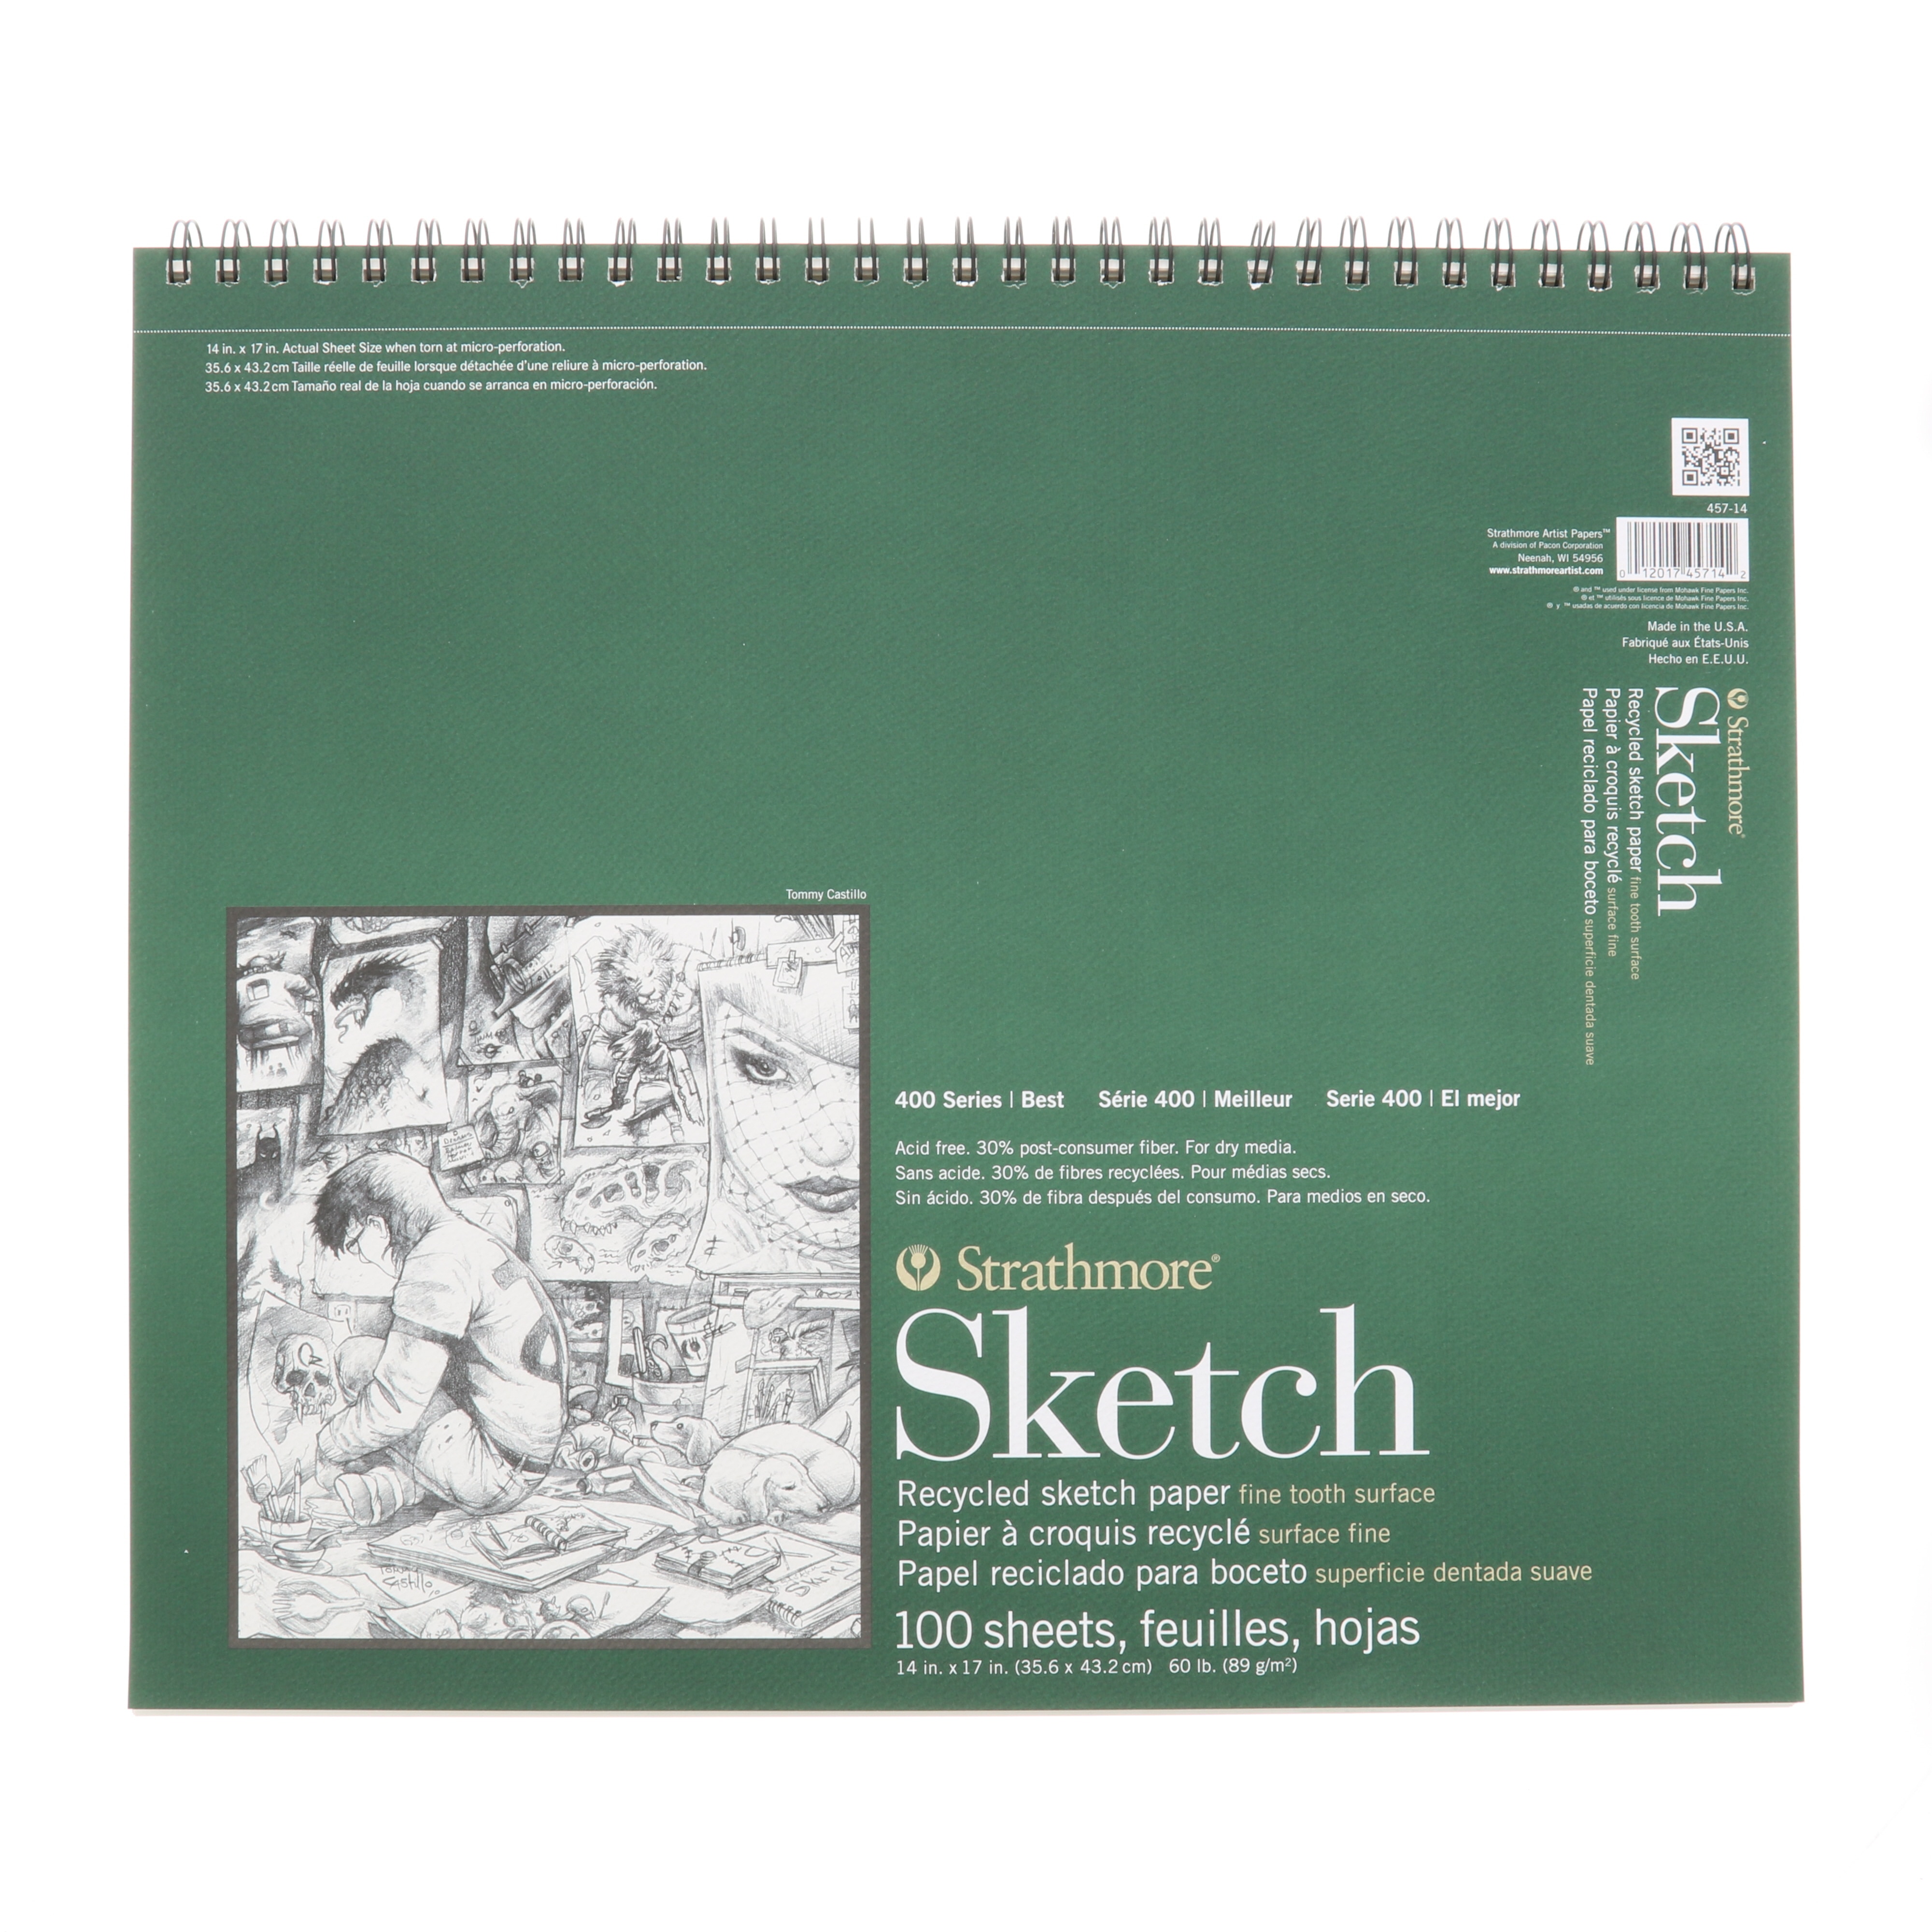 Strathmore Sketch Paper Pad, 400 Series, Recycled, 14" x 17", 100 Sheets